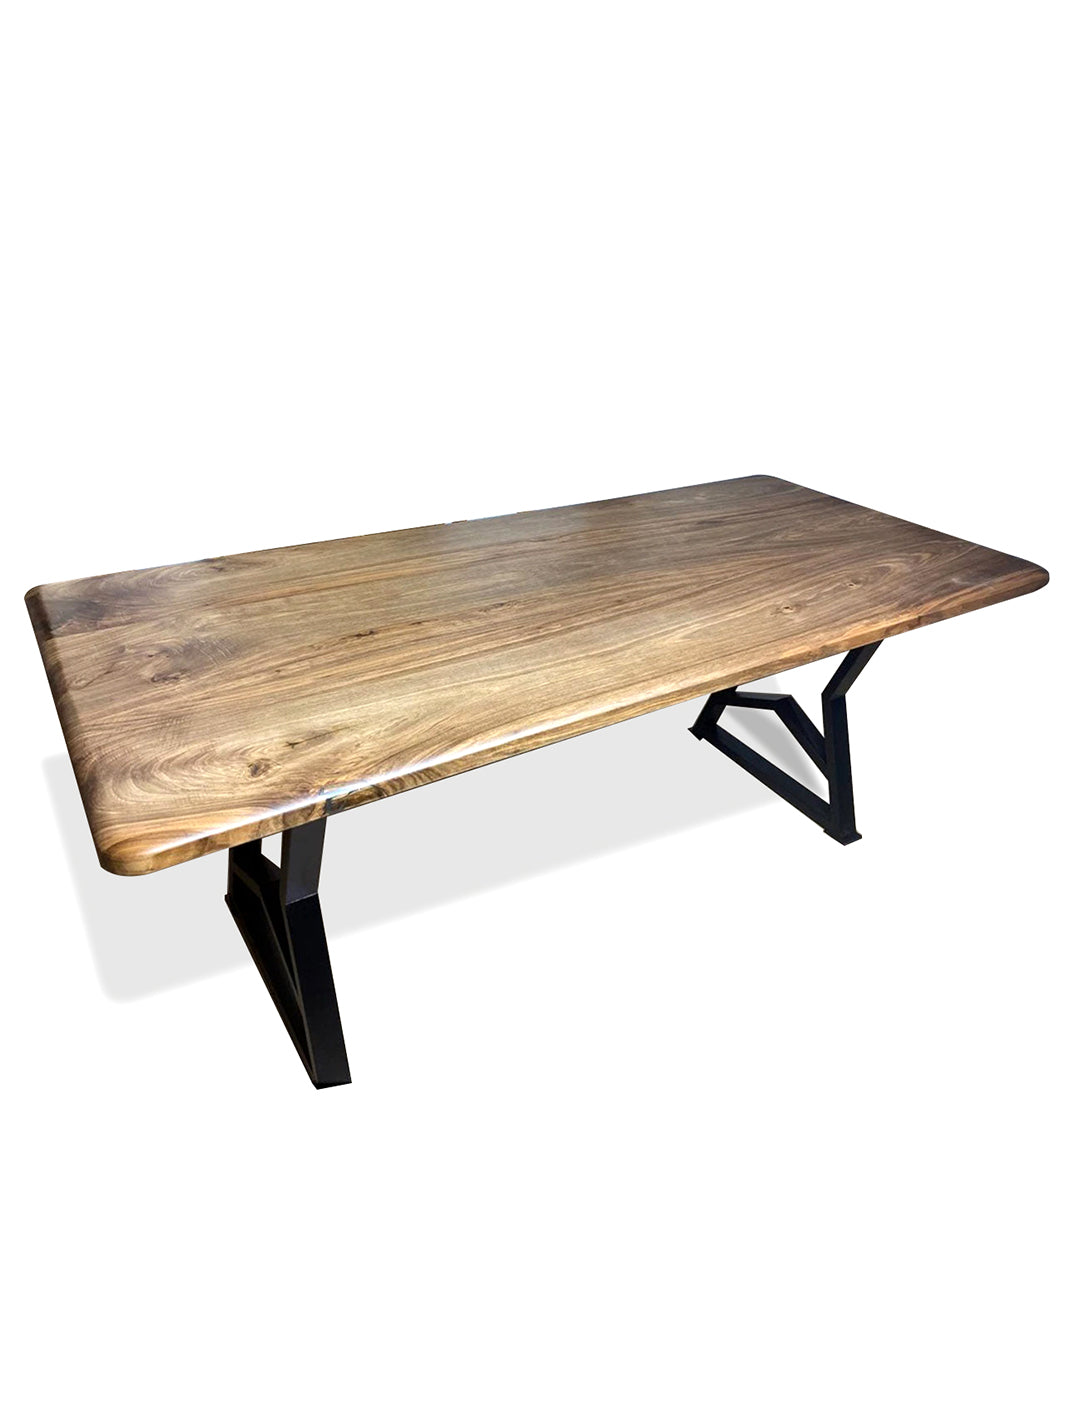 Handcrafted Solid Oak Wood Dining Table